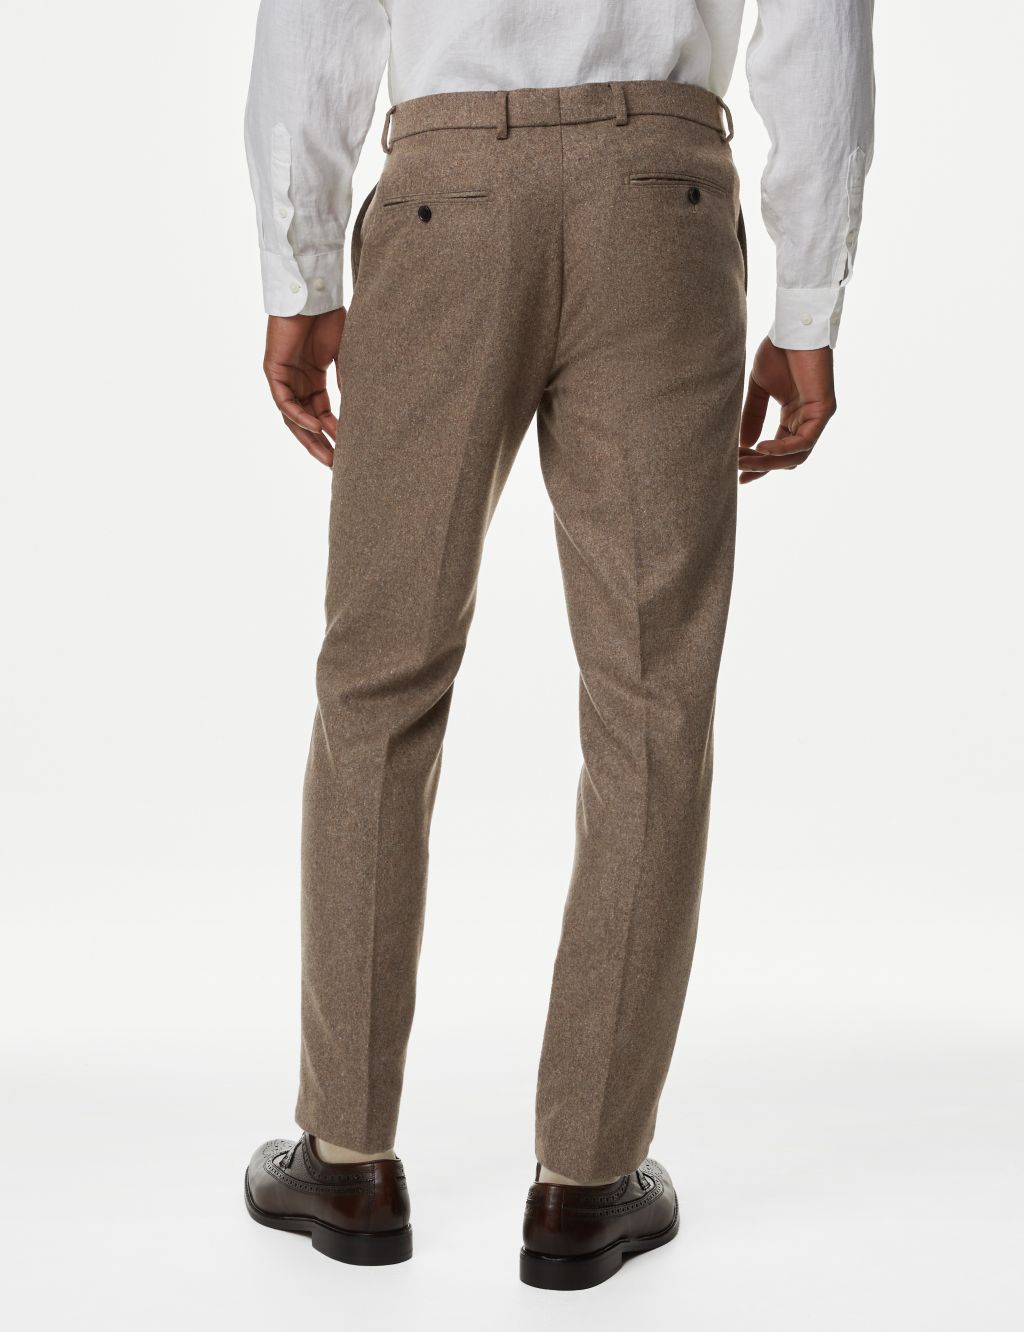 Tailored Fit Wool Rich Donegal Suit Trousers image 5